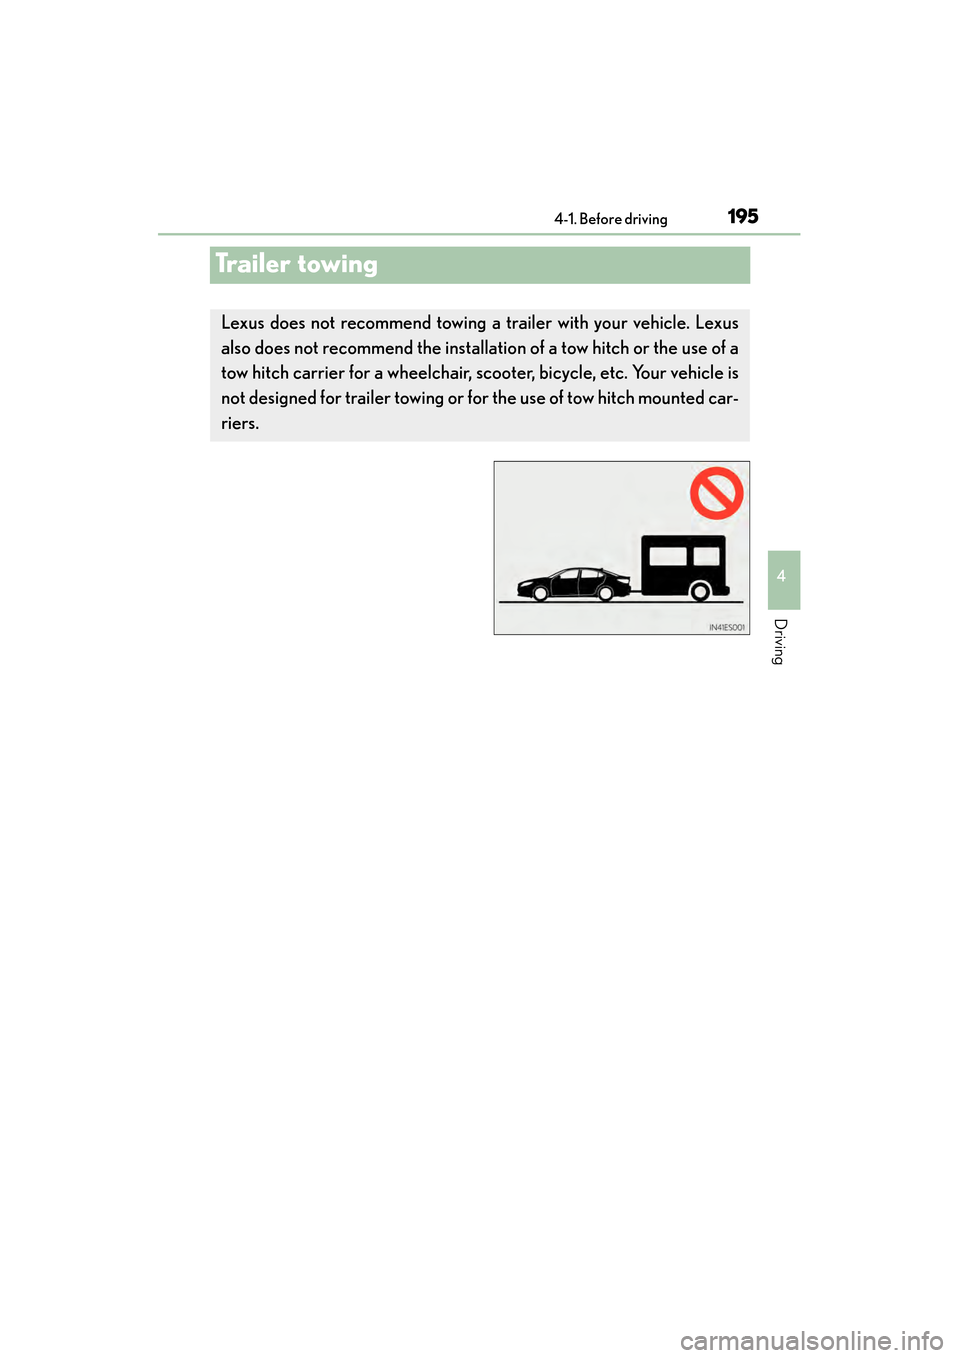 Lexus ES300h 2013  Owners Manual 195
ES350 300h_OM_OM33A01U_(U)
4-1. Before driving
4
Driving
Trailer towing
Lexus does not recommend towing a trailer with your vehicle. Lexus
also does not recommend  the installation of a tow hitch 